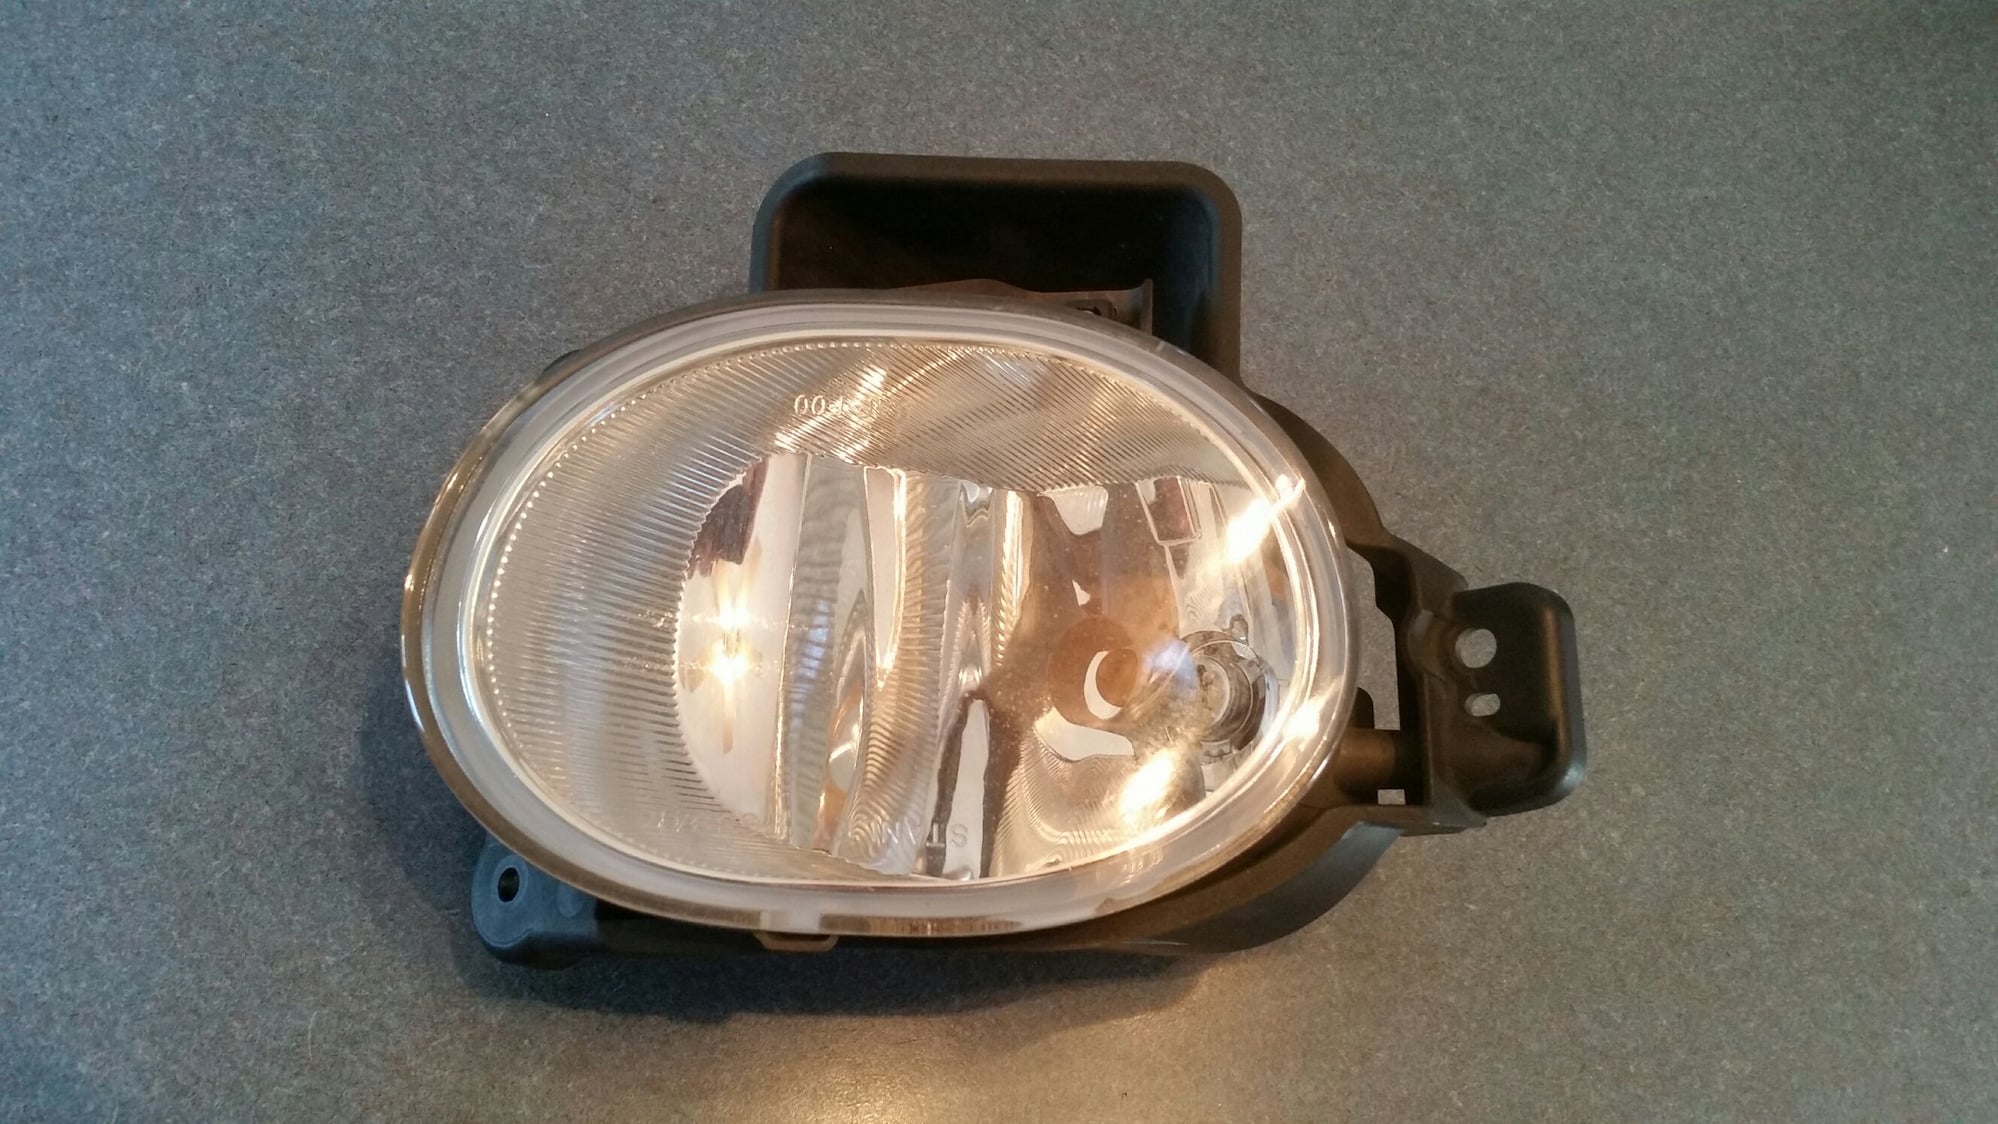 Lights - SOLD: 07-08 Acura TL Fog Light Passenger Side - Used - 2007 to 2008 Acura TL - Middletown, DE 19709, United States